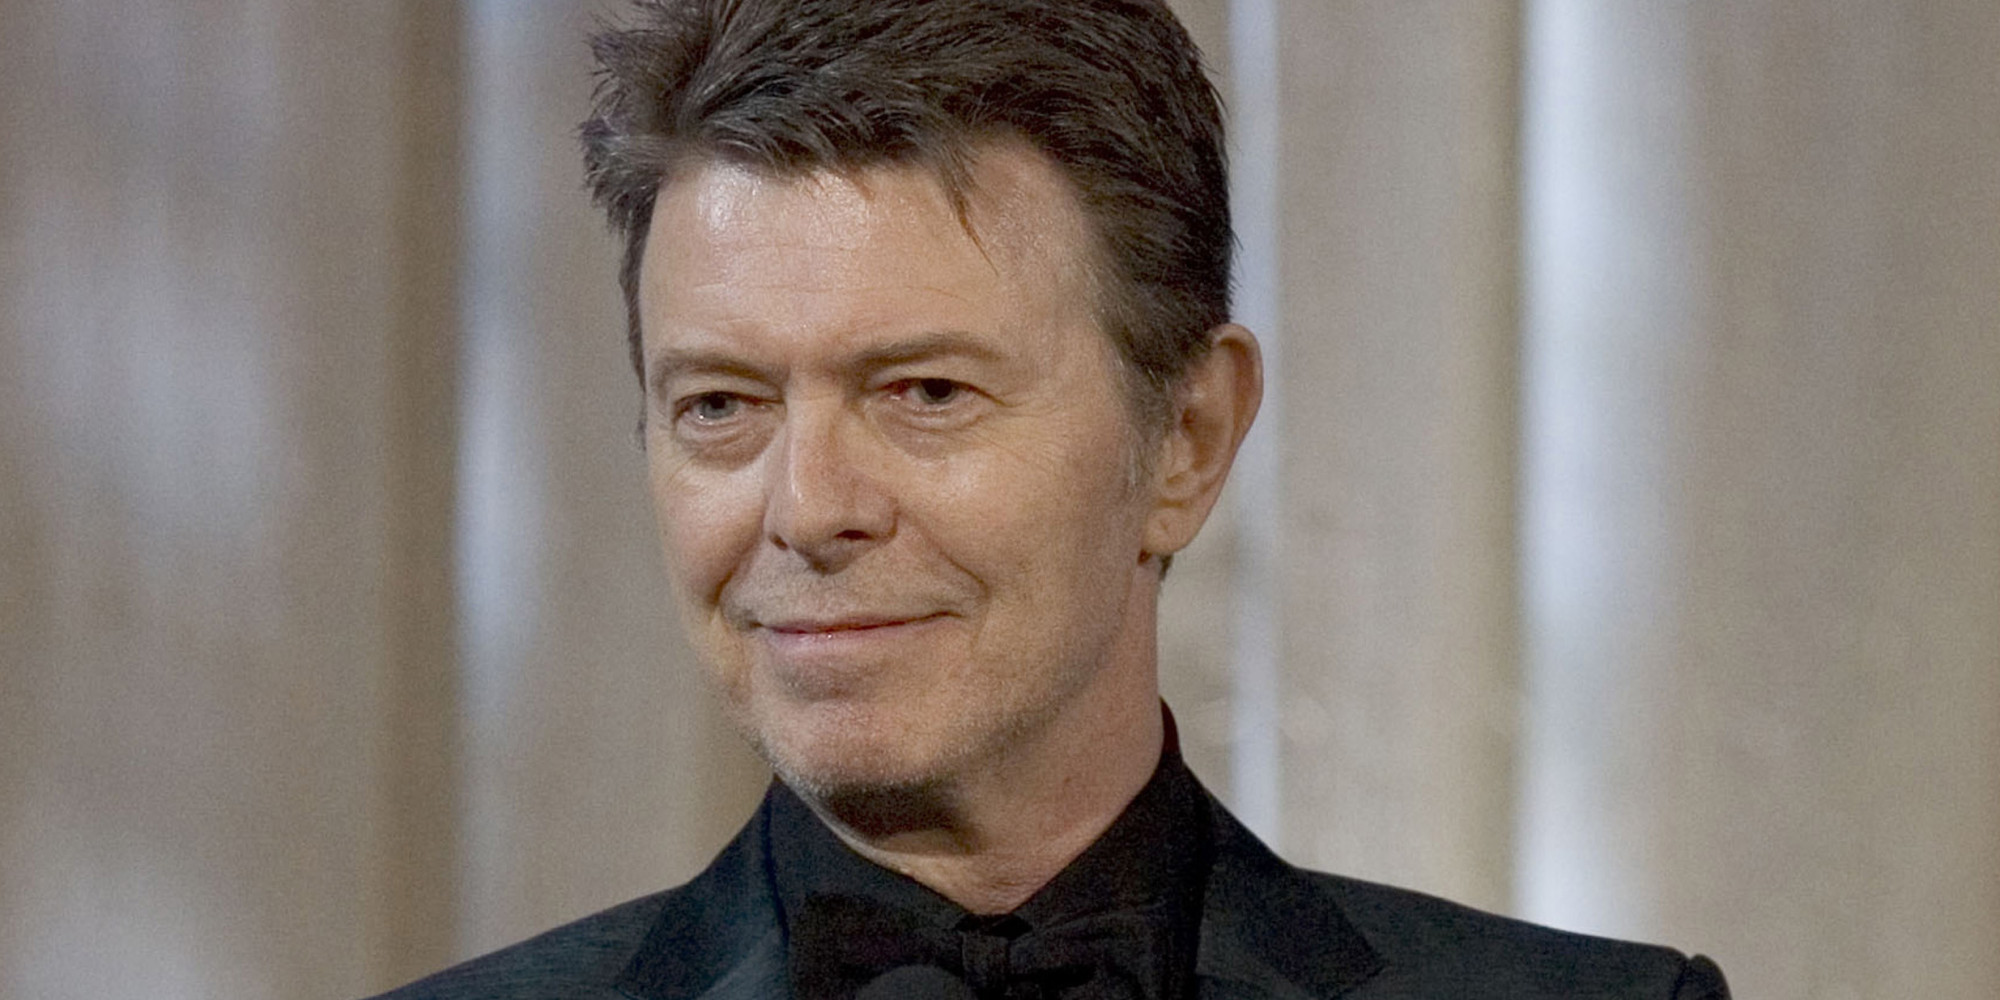 FILE - David Bowie attends an awards show in this June 5, 2007 file photo taken in New York. The English singer announced Tuesday,  Jan. 8, 2013 his 66th birthday, that he has released his first song in 10 years titled "Where Are We Now?" A new album, "The Next Day," will be out March 11 and 12 in the United Kingdom and the United States, respectively. (AP Photo/Stephen Chernin)